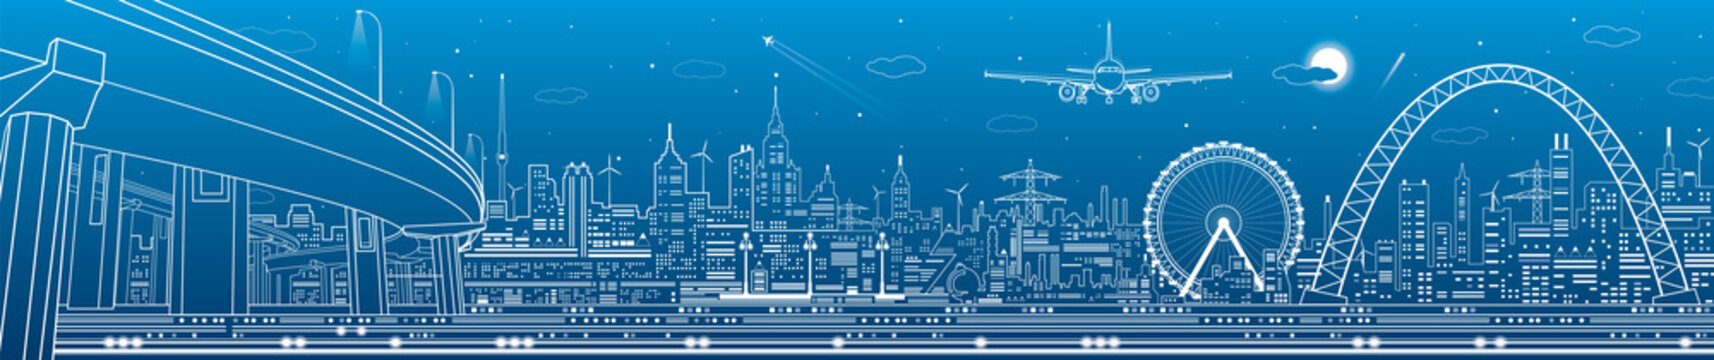 Industrial and technology panorama, urban landscape, infrastructure scene, night city, vector design art